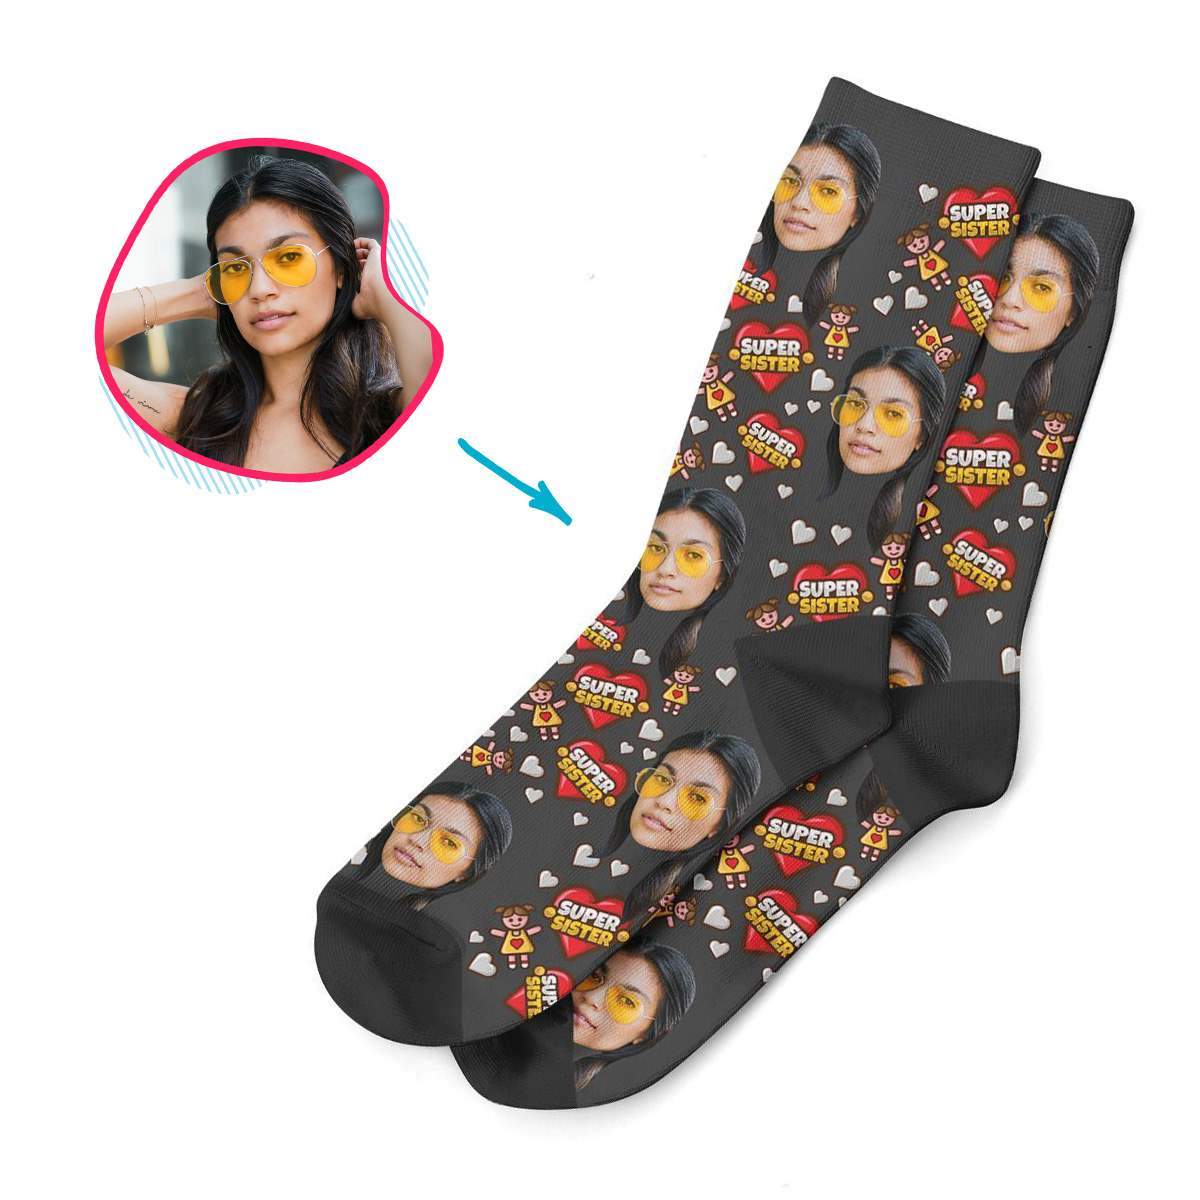 white Super Sister socks personalized with photo of face printed on them